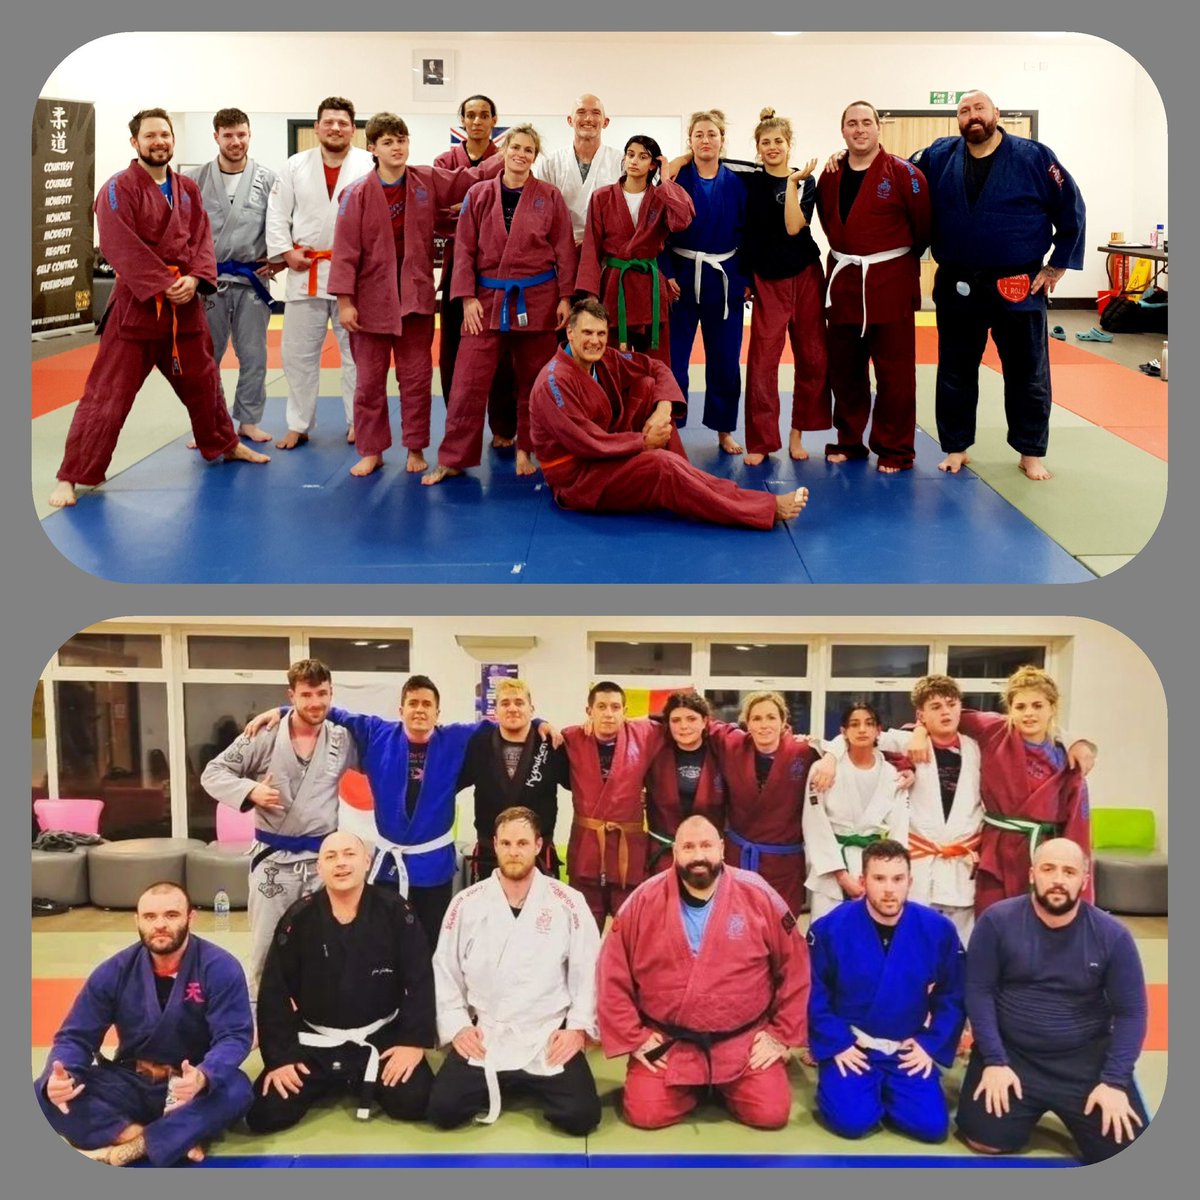 Adult sessions growing and developing, #judo and #bjj this week at our little  #dojo #Andover #testvalley #hampshirejudo